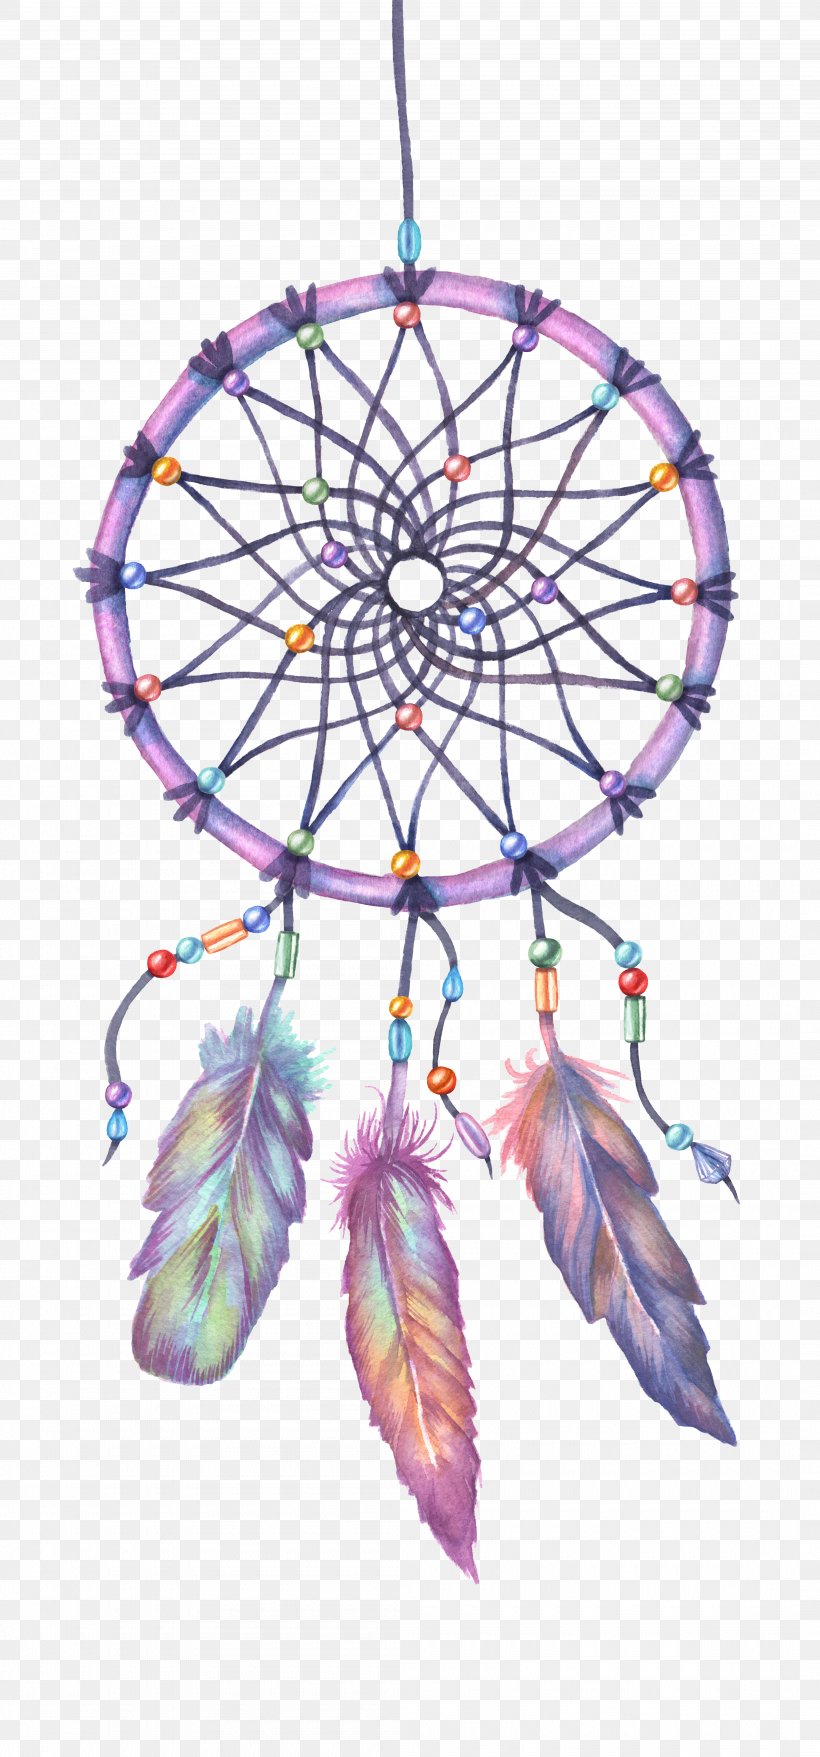 Dreamcatcher Drawing Watercolor Painting Illustration, PNG, 4200x9000px, Dreamcatcher, Branch, Drawing, Feather, Ornament Download Free